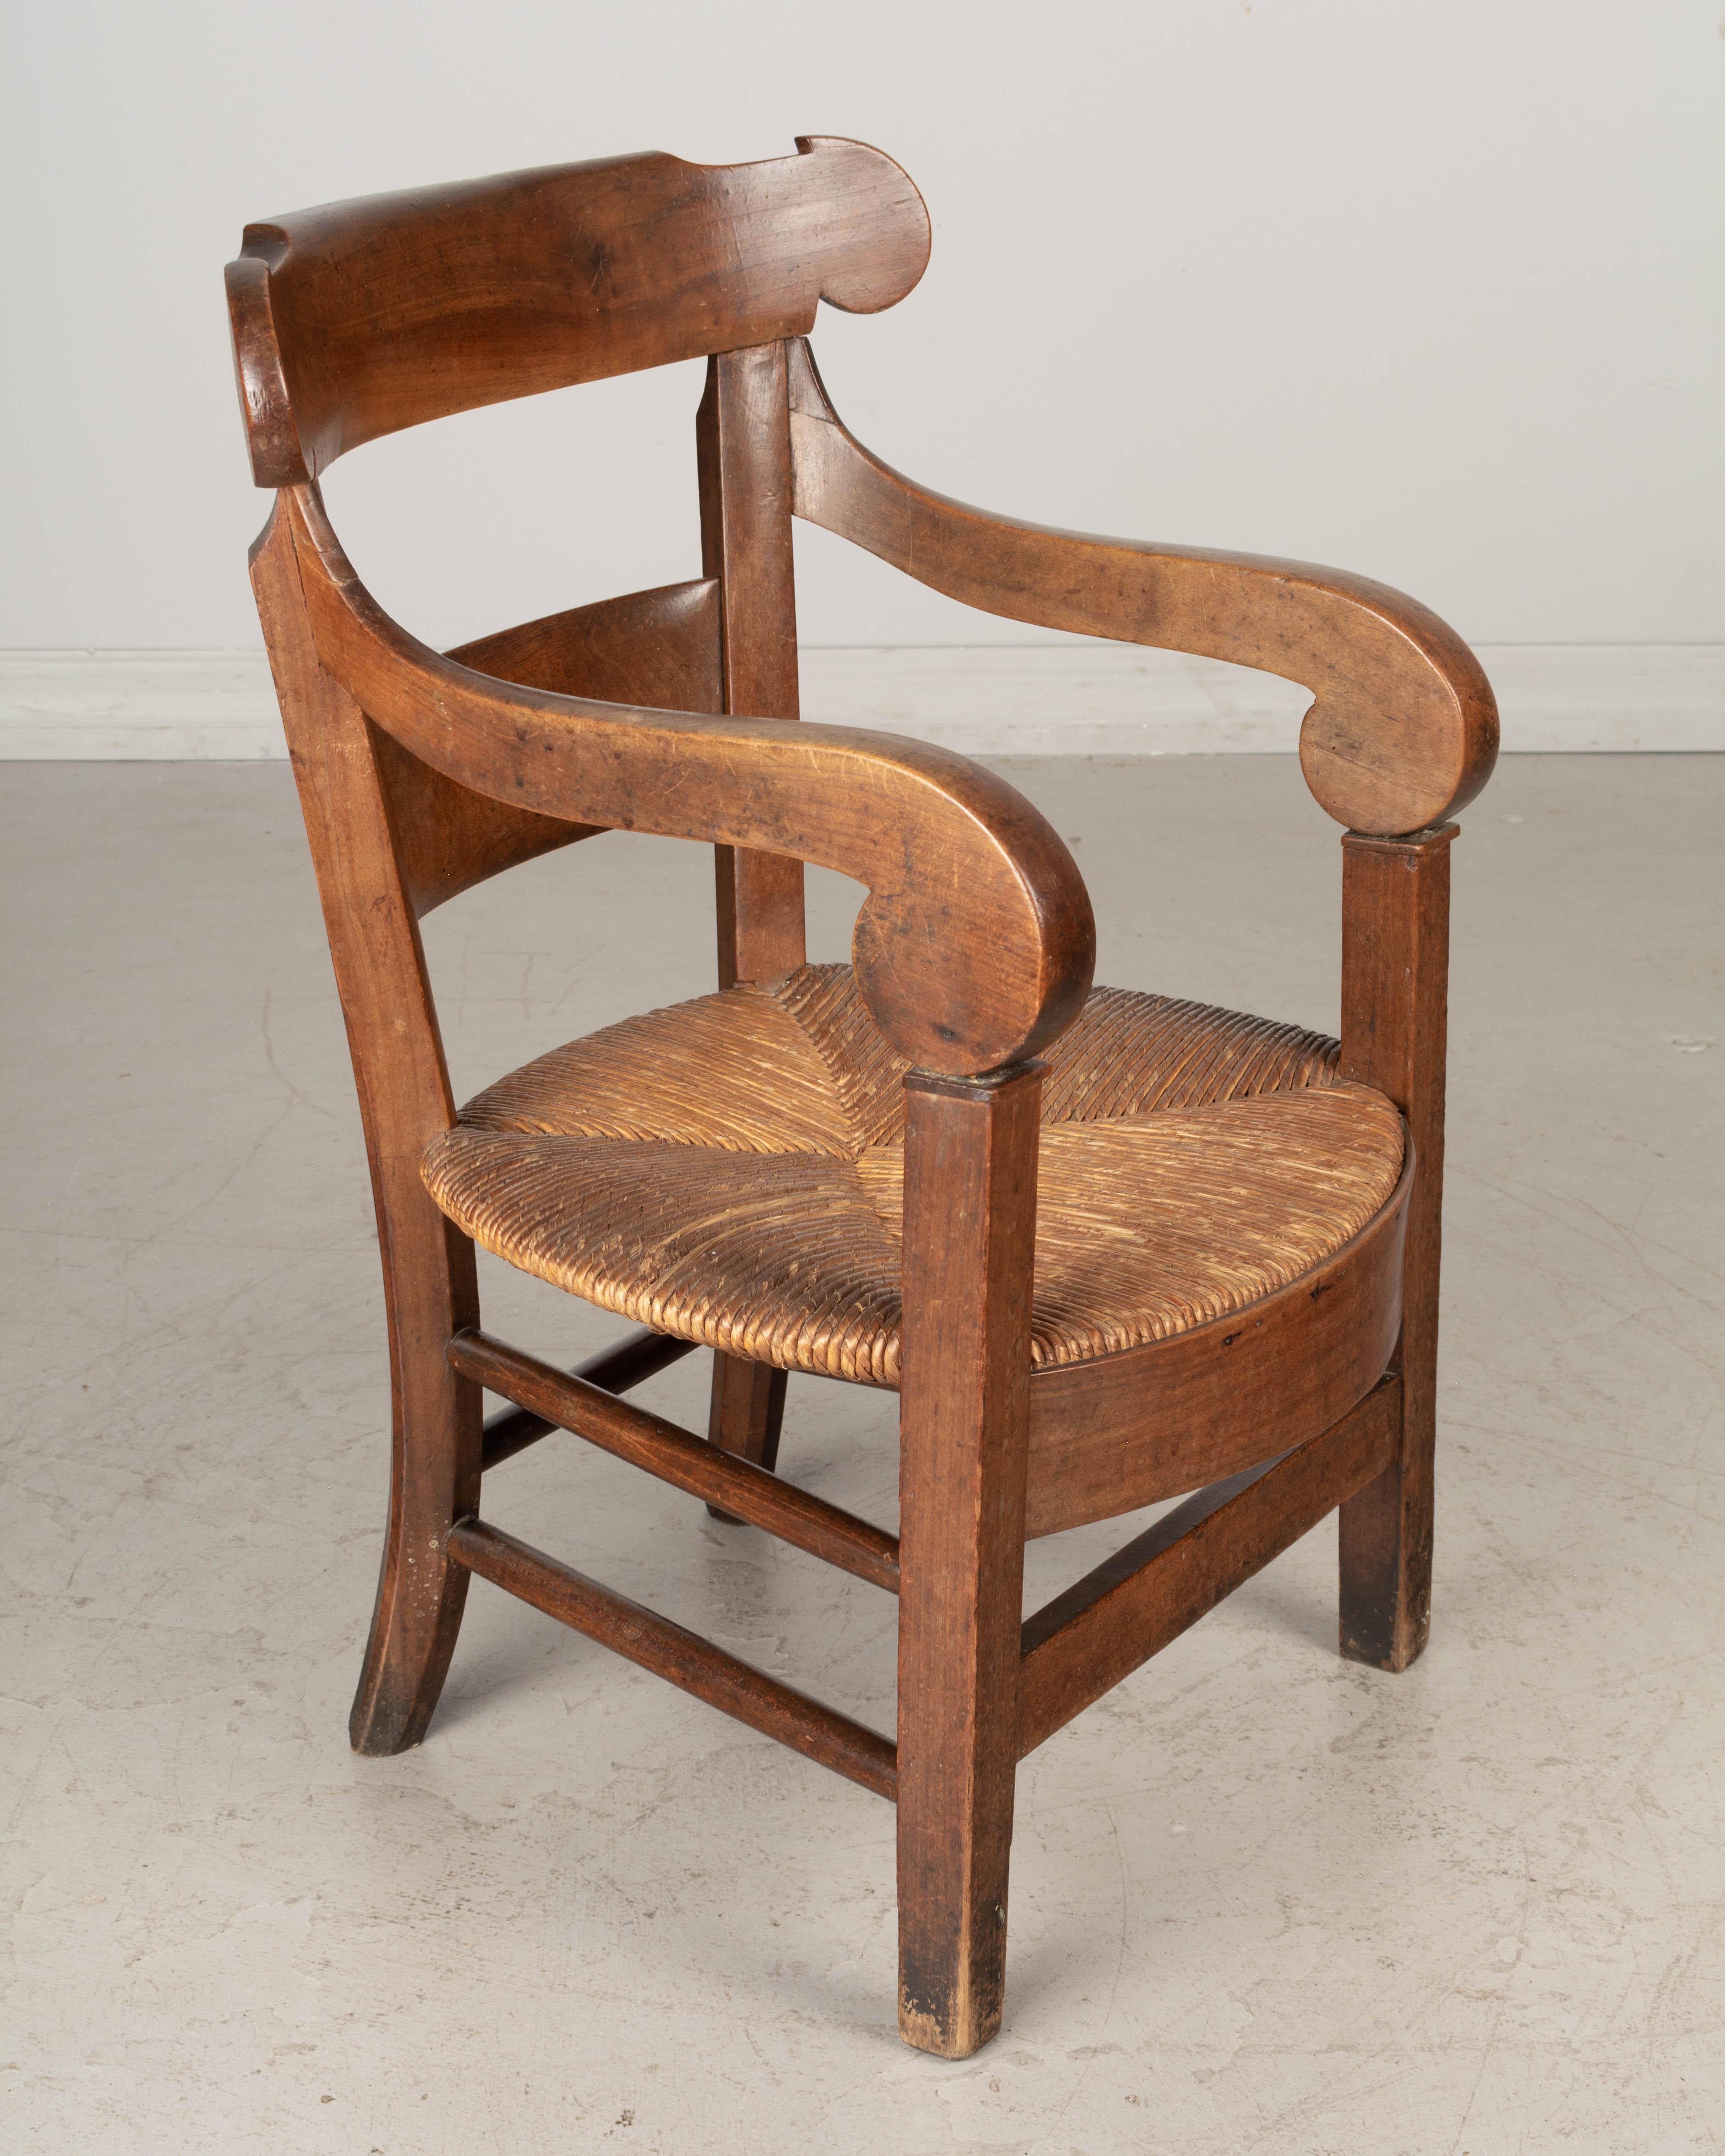 A 19th century Country French child size chair hand crafted of solid walnut with large scrolled arms and natural rush seat. Waxed patina. Good and sturdy.